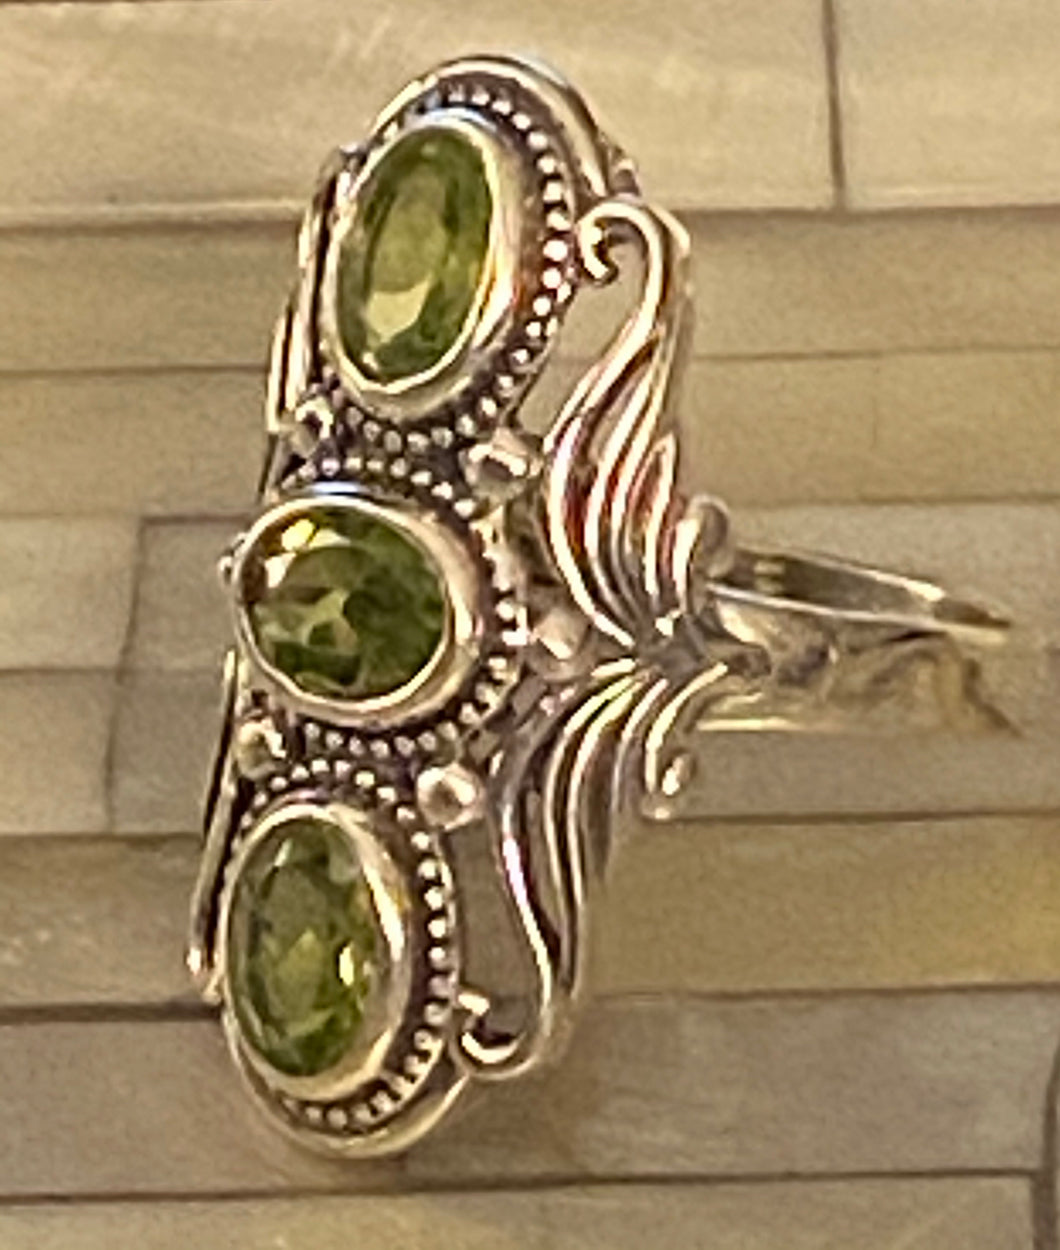 Solid Sterling Silver Genuine Peridot Gemstone Ring Natural Stone Size 8